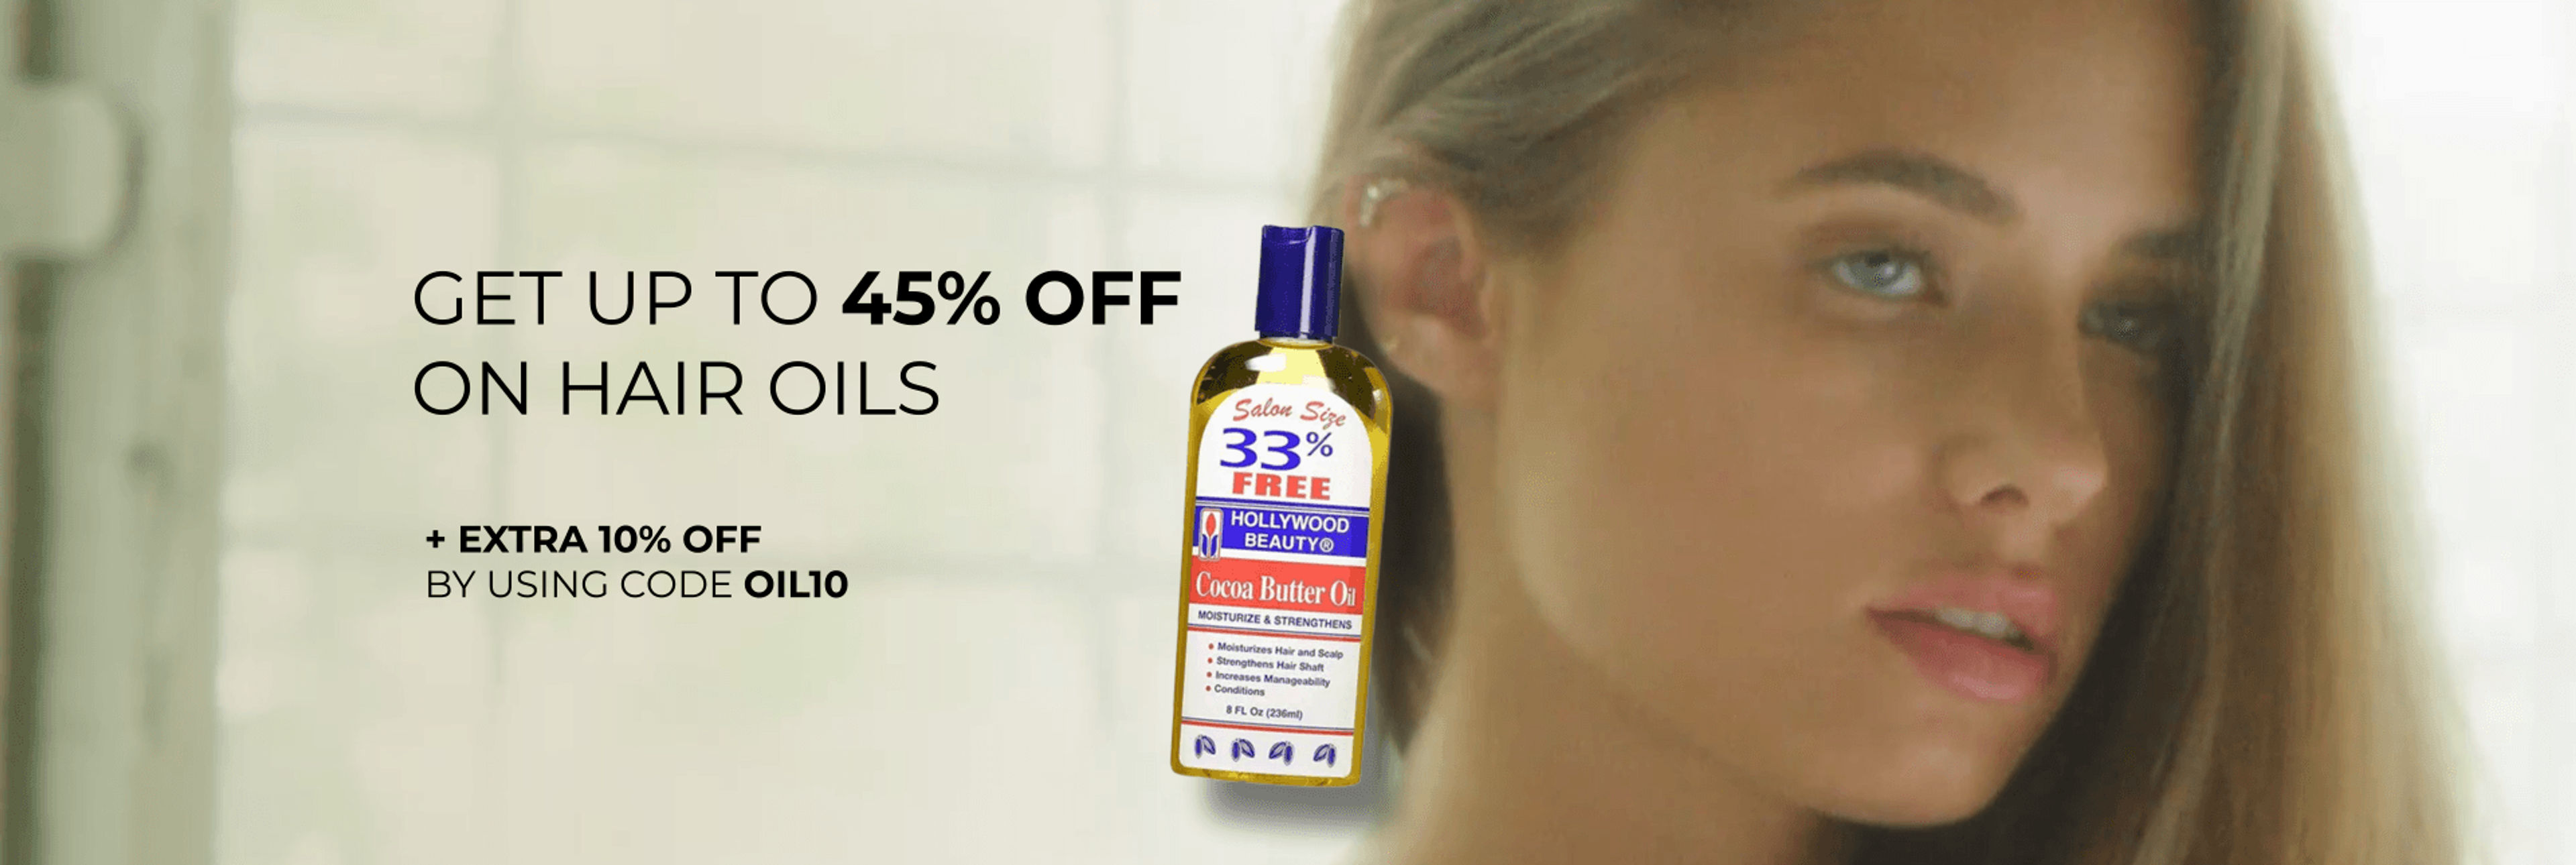 Get Up to 45% off on Hair Oils + Extra 10% off by using code